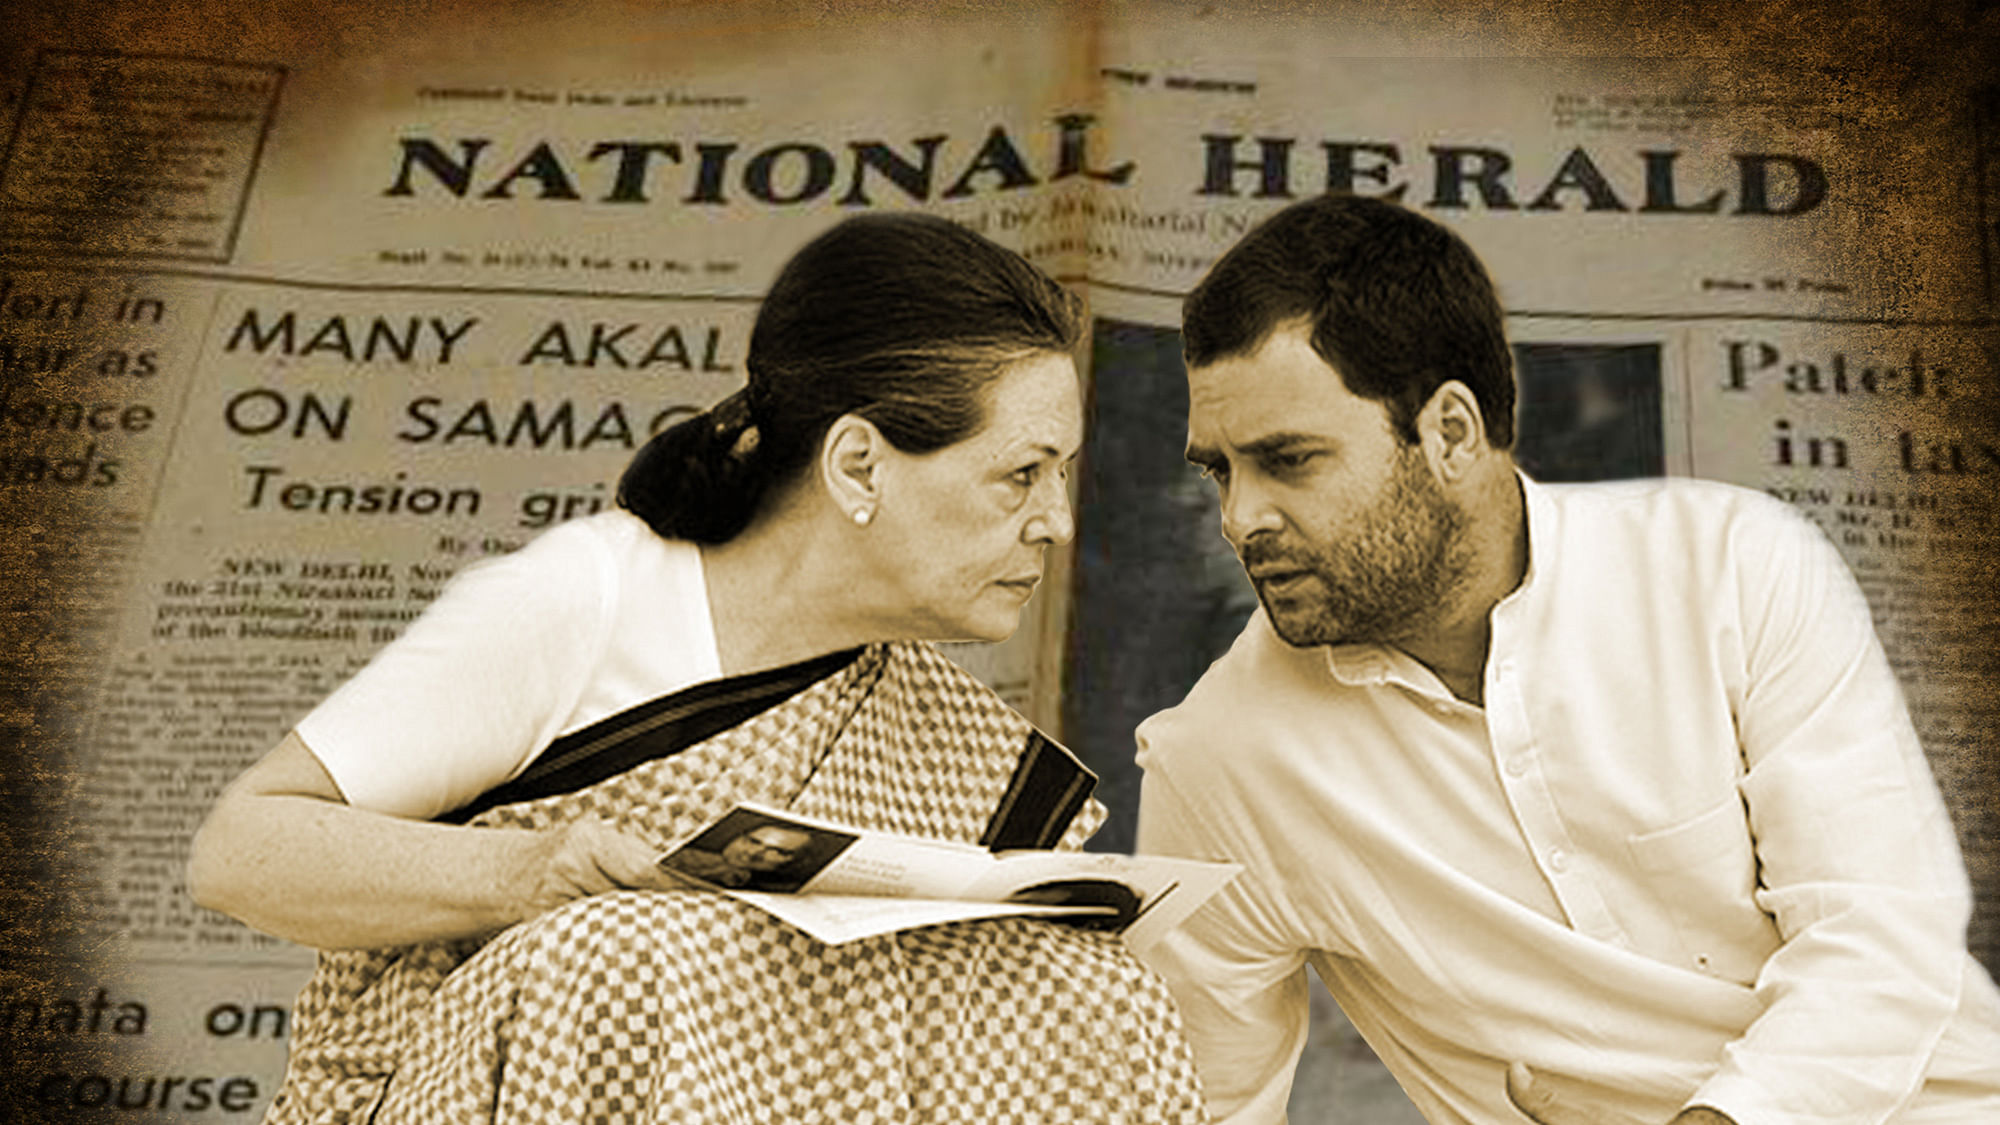 The Centre said AJL “clandestinely” transferred its majority shares to Young India in which Congress chief Rahul Gandhi and his mother Sonia Gandhi are shareholders.